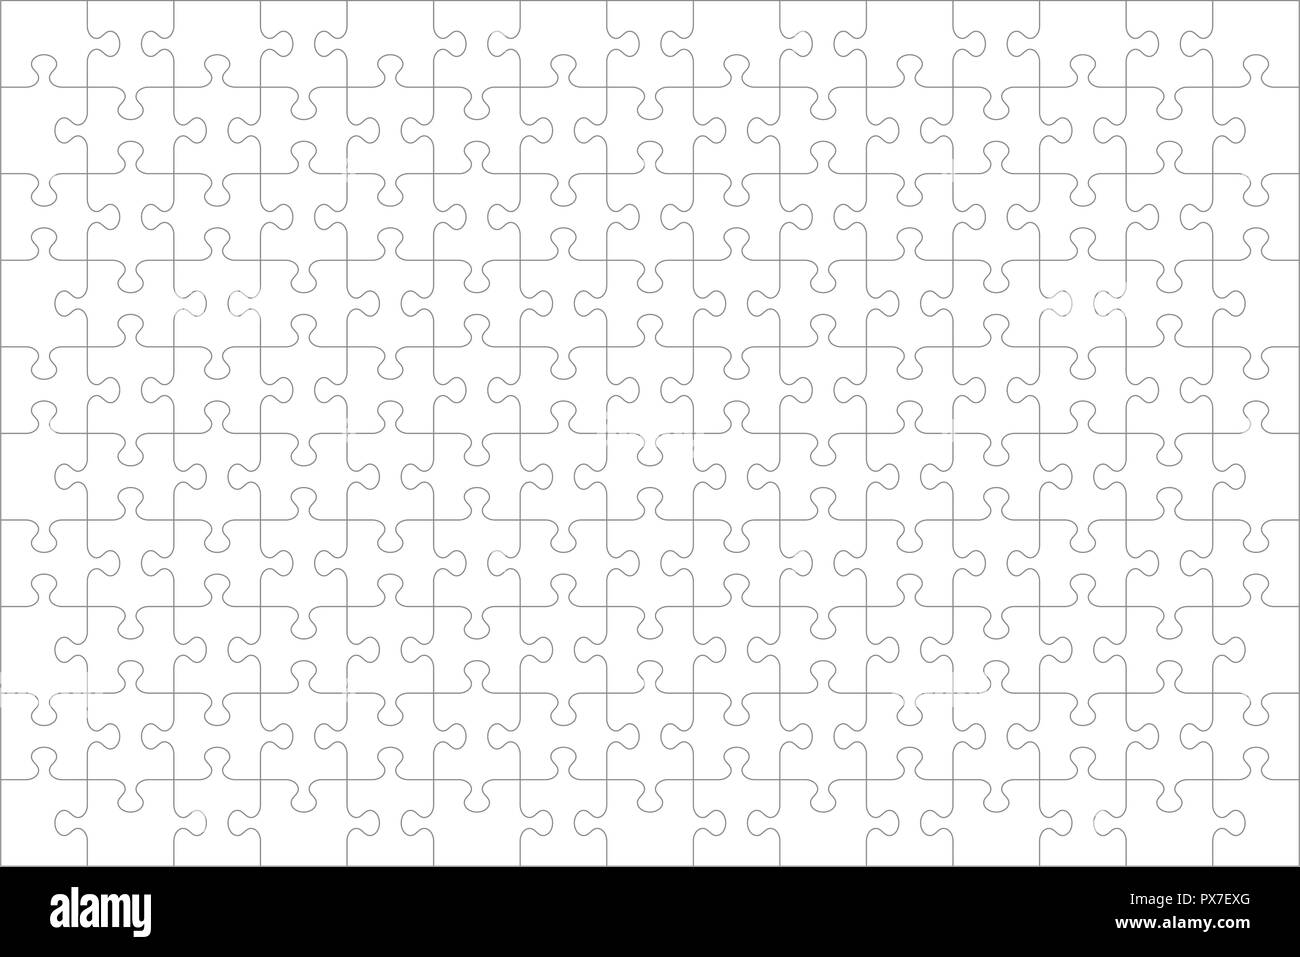 Jigsaw puzzle blank template or cutting guidelines of 150 transparent pieces, landscape orientation, and visual ratio 3:2 (every piece is a single shape). Stock Vector